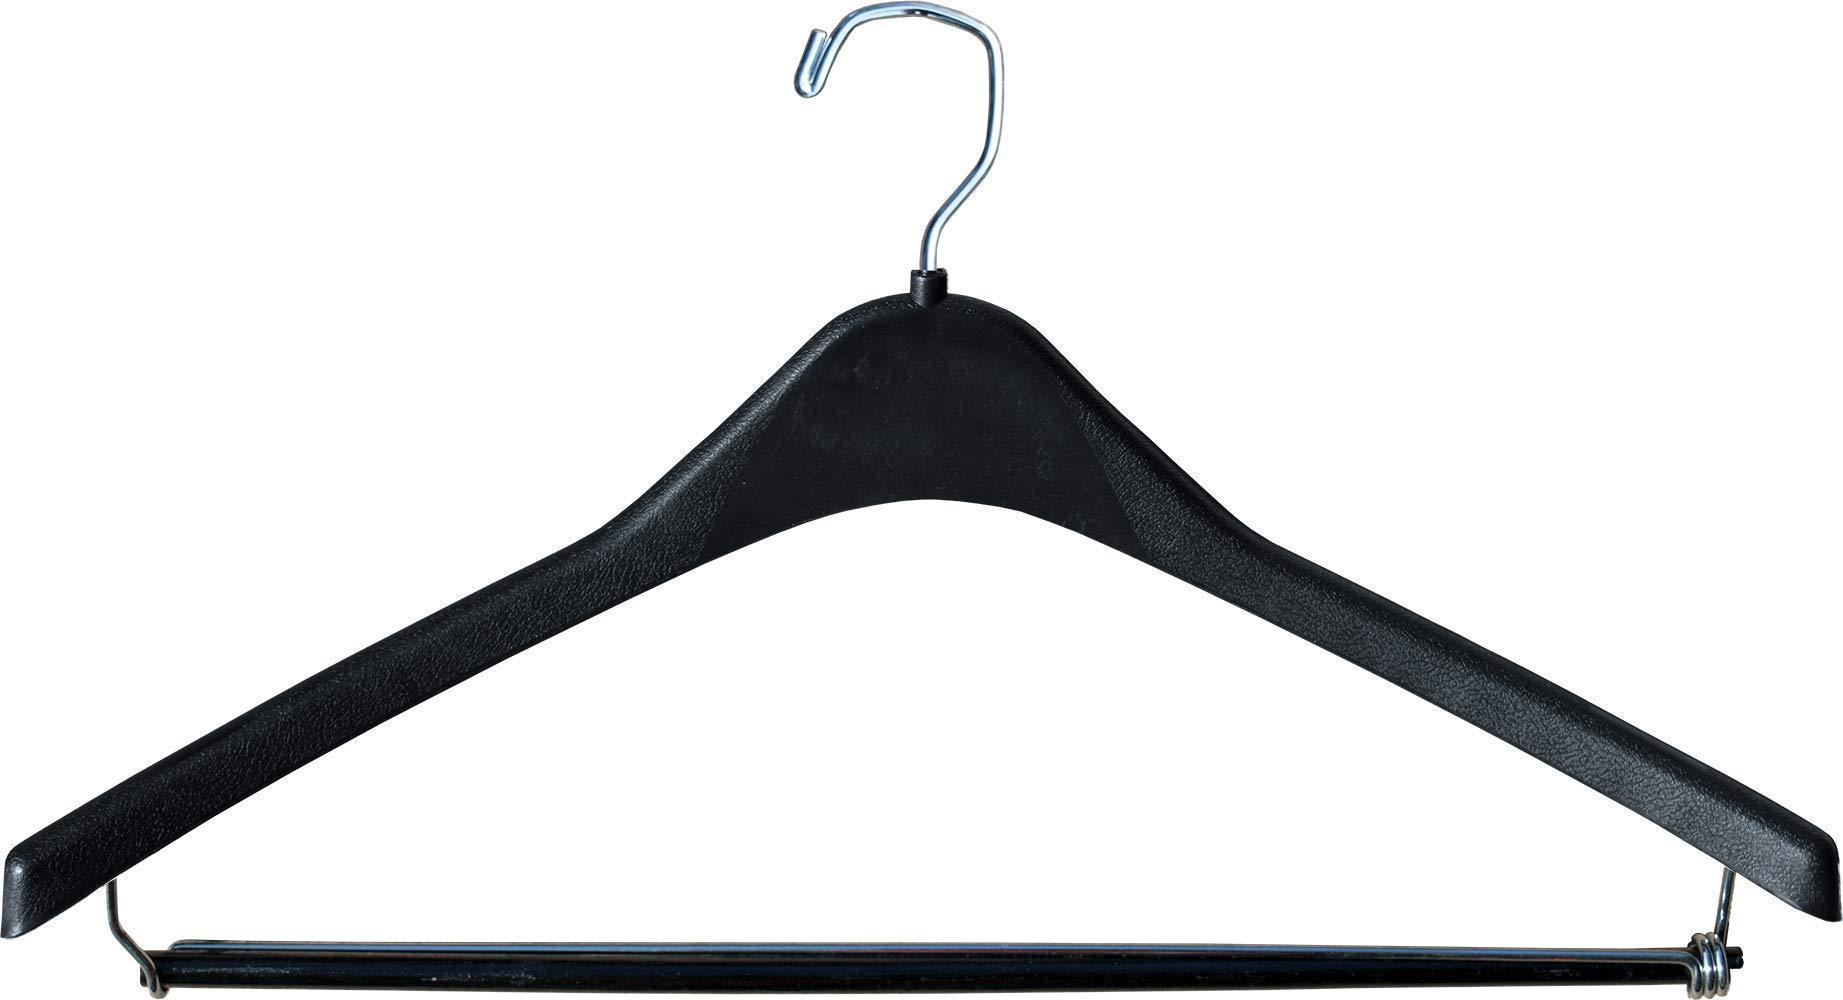 The Great American Hanger Company Heavy-Duty Black Plastic Suit Hanger with Locking Wooden Pant Bar, (Box of 100) 1/2 Inch Thick Curved Hangers for Uniforms and Coats